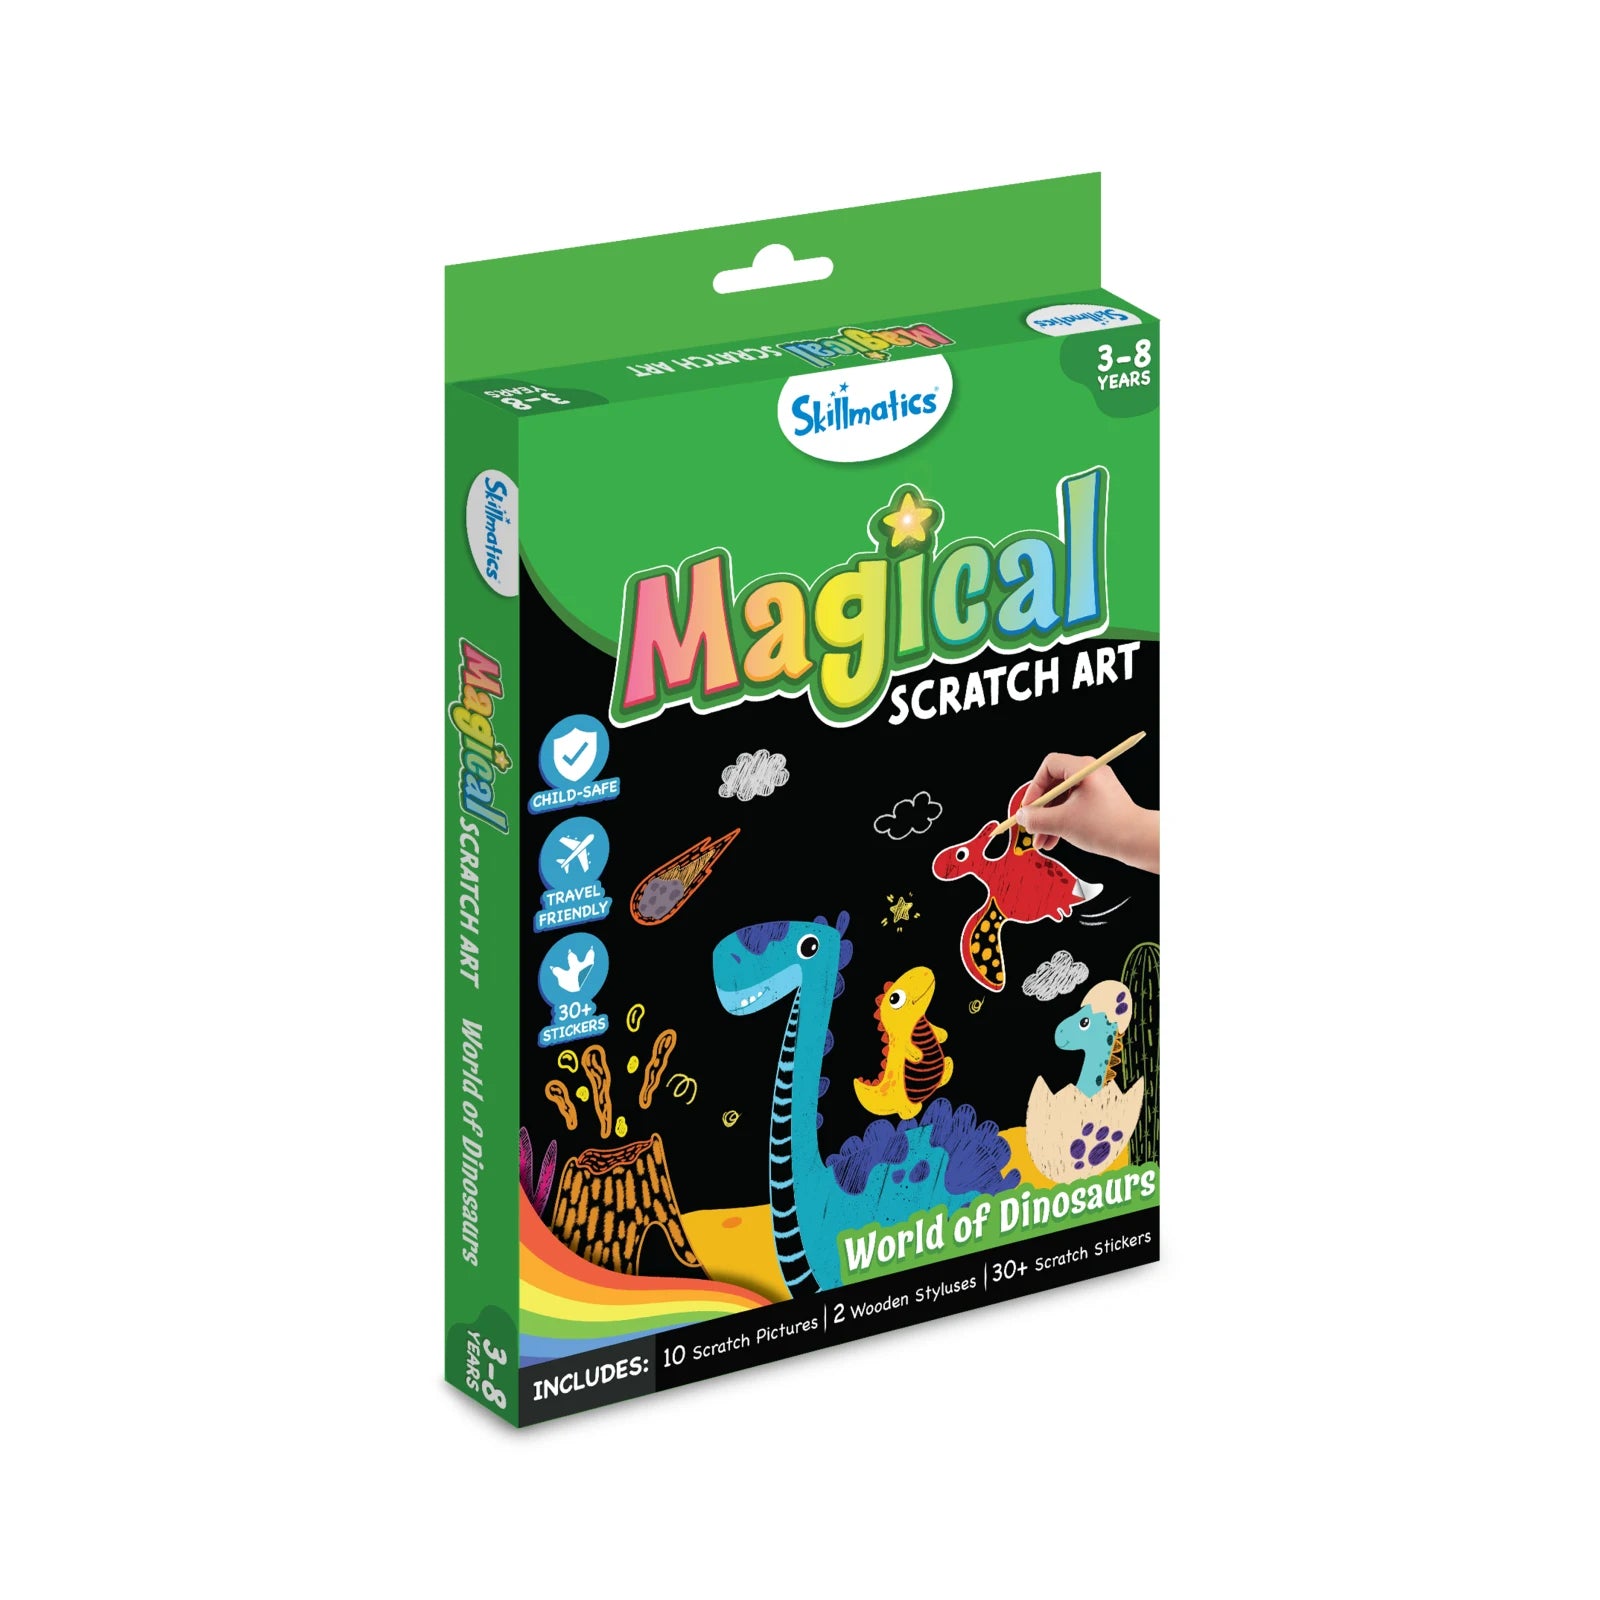 Magical Scratch Art Book: World of Dinosaurs (ages 3-8)